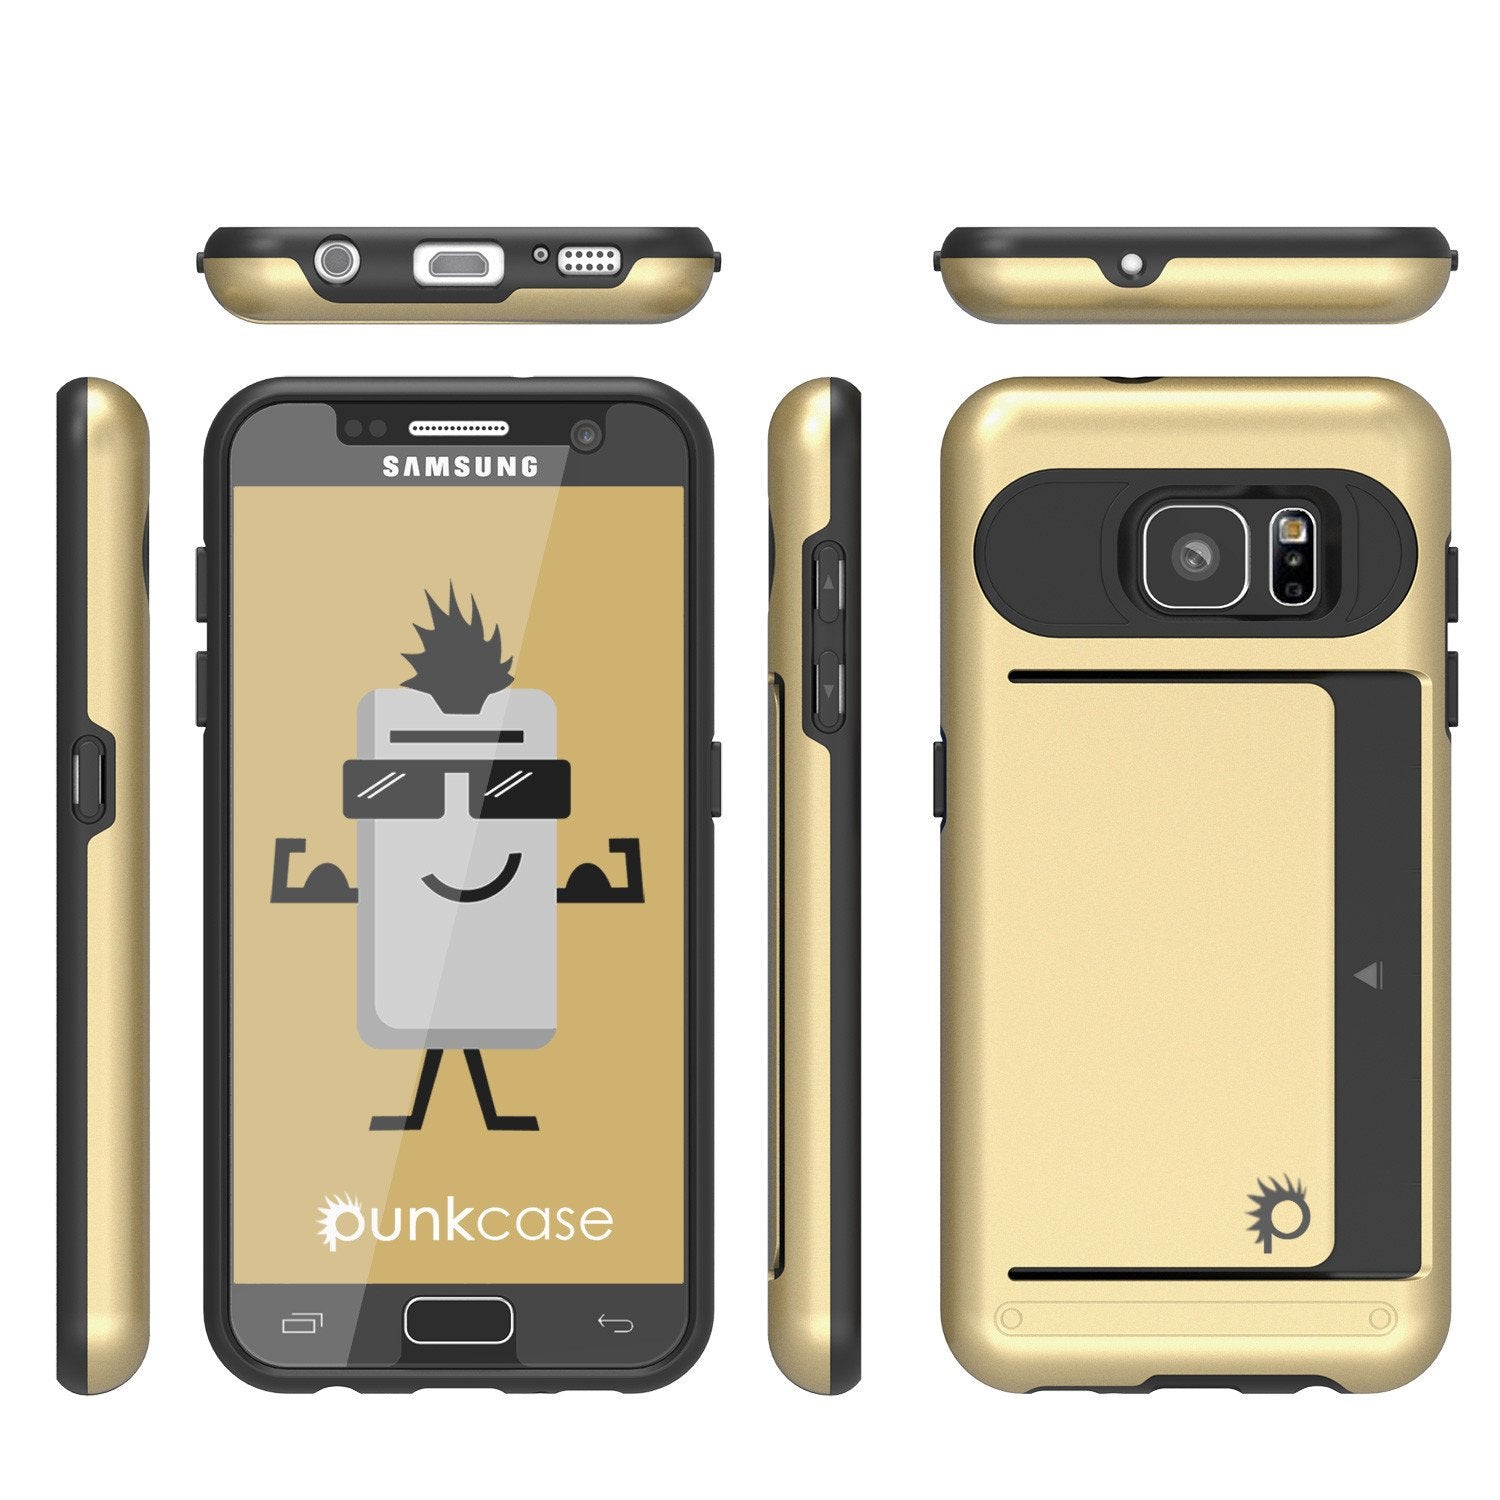 Galaxy S7 EDGE Case PunkCase CLUTCH Gold Series Slim Armor Soft Cover Case w/ Screen Protector - PunkCase NZ